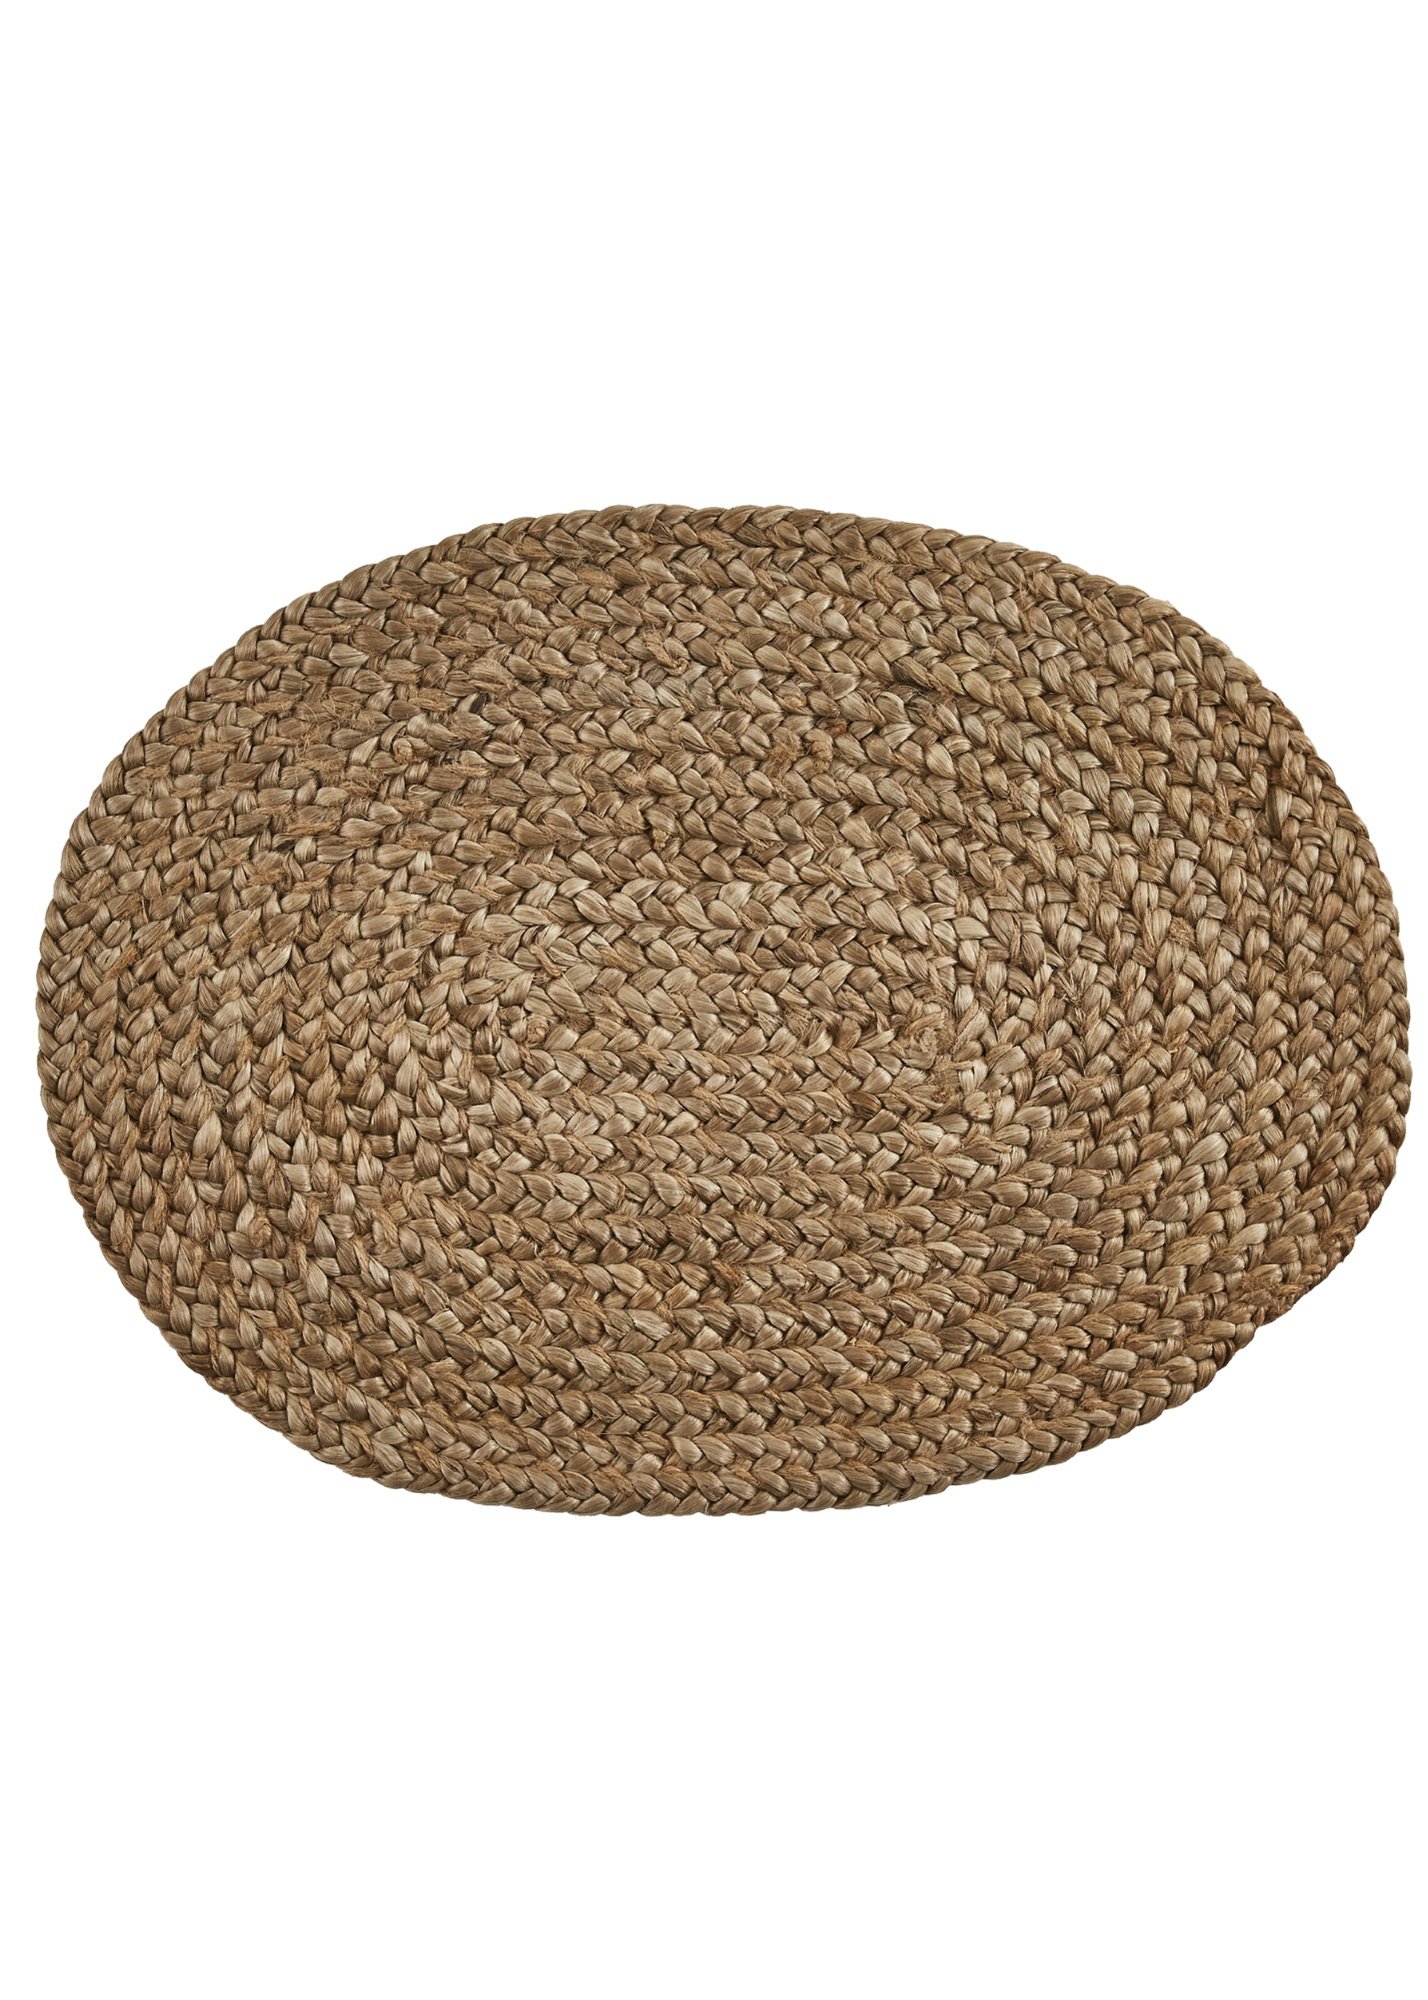 Oval Jute Braided Placemat